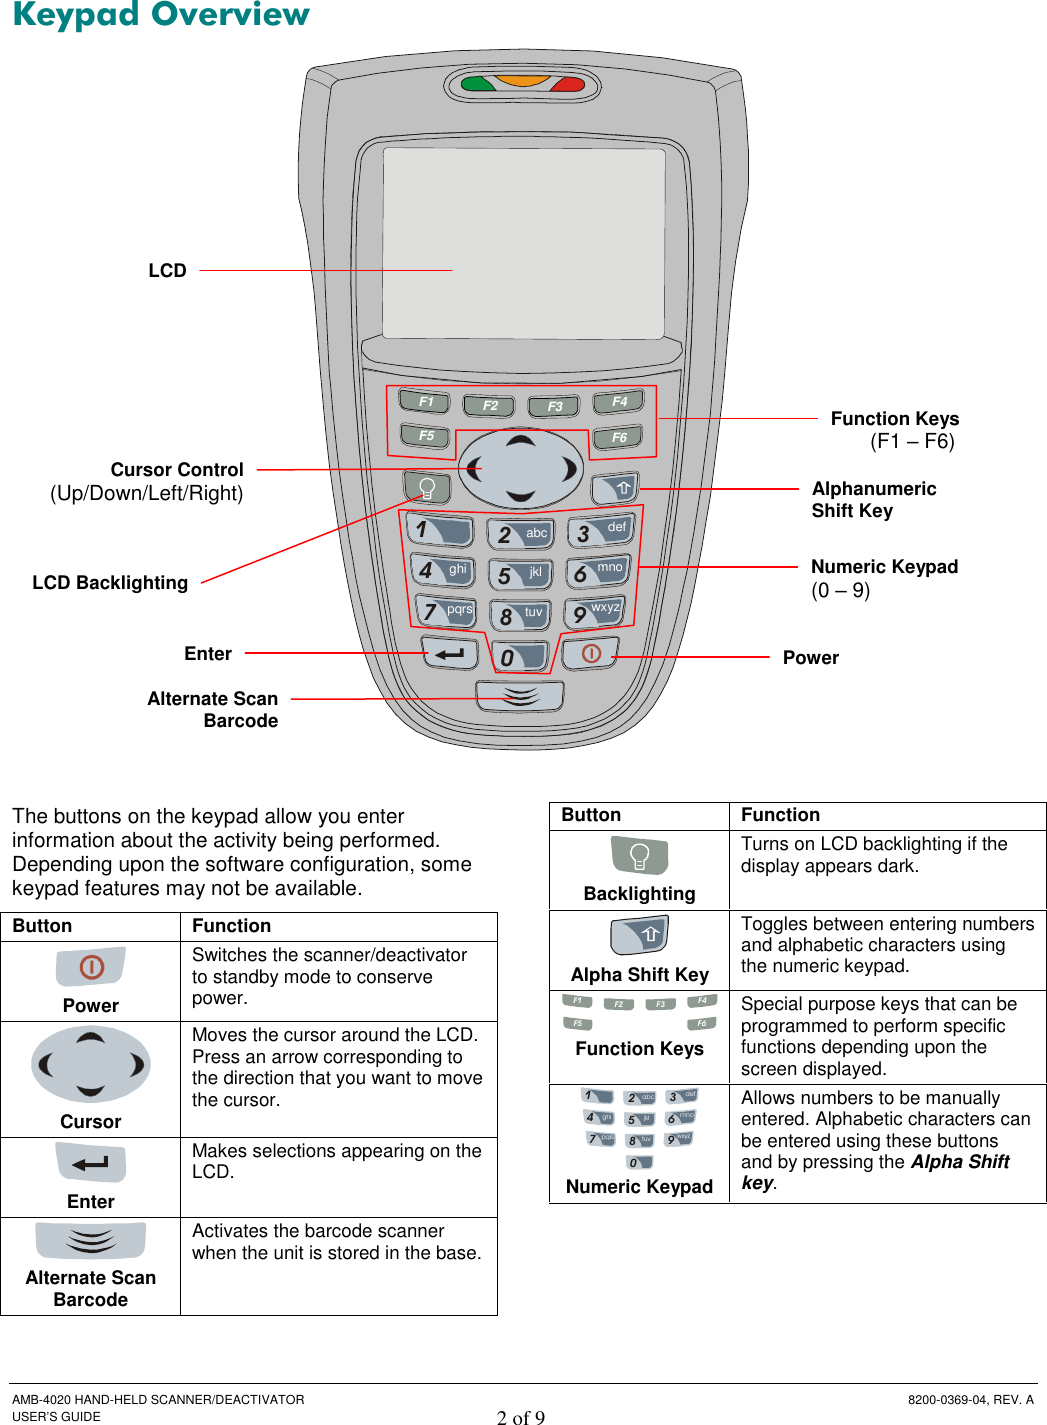  AMB-4020 HAND-HELD SCANNER/DEACTIVATOR  8200-0369-04, REV. A USER’S GUIDE 2 of 9  Keypad Overview F1F2F3F4F5F61pqrs79wxyz3def4ghiabc2jkl5tuv86mno0   The buttons on the keypad allow you enter information about the activity being performed. Depending upon the software configuration, some keypad features may not be available. Button  Function   Power Switches the scanner/deactivator to standby mode to conserve power.  Cursor Moves the cursor around the LCD. Press an arrow corresponding to the direction that you want to move the cursor.  Enter Makes selections appearing on the LCD.  Alternate Scan Barcode Activates the barcode scanner when the unit is stored in the base. Button  Function  Backlighting Turns on LCD backlighting if the display appears dark.  Alpha Shift Key Toggles between entering numbers and alphabetic characters using the numeric keypad. F1 F2 F3 F4F5F6 Function Keys Special purpose keys that can be programmed to perform specific functions depending upon the screen displayed. 1pqrs79wxyz3def4ghiabc2jkl5tuv86mno0 Numeric Keypad Allows numbers to be manually entered. Alphabetic characters can be entered using these buttons and by pressing the Alpha Shift key. Function Keys (F1 – F6) Numeric Keypad  (0 – 9) Power Cursor Control(Up/Down/Left/Right)LCD BacklightingEnterAlternate Scan Barcode LCDAlphanumeric Shift Key 